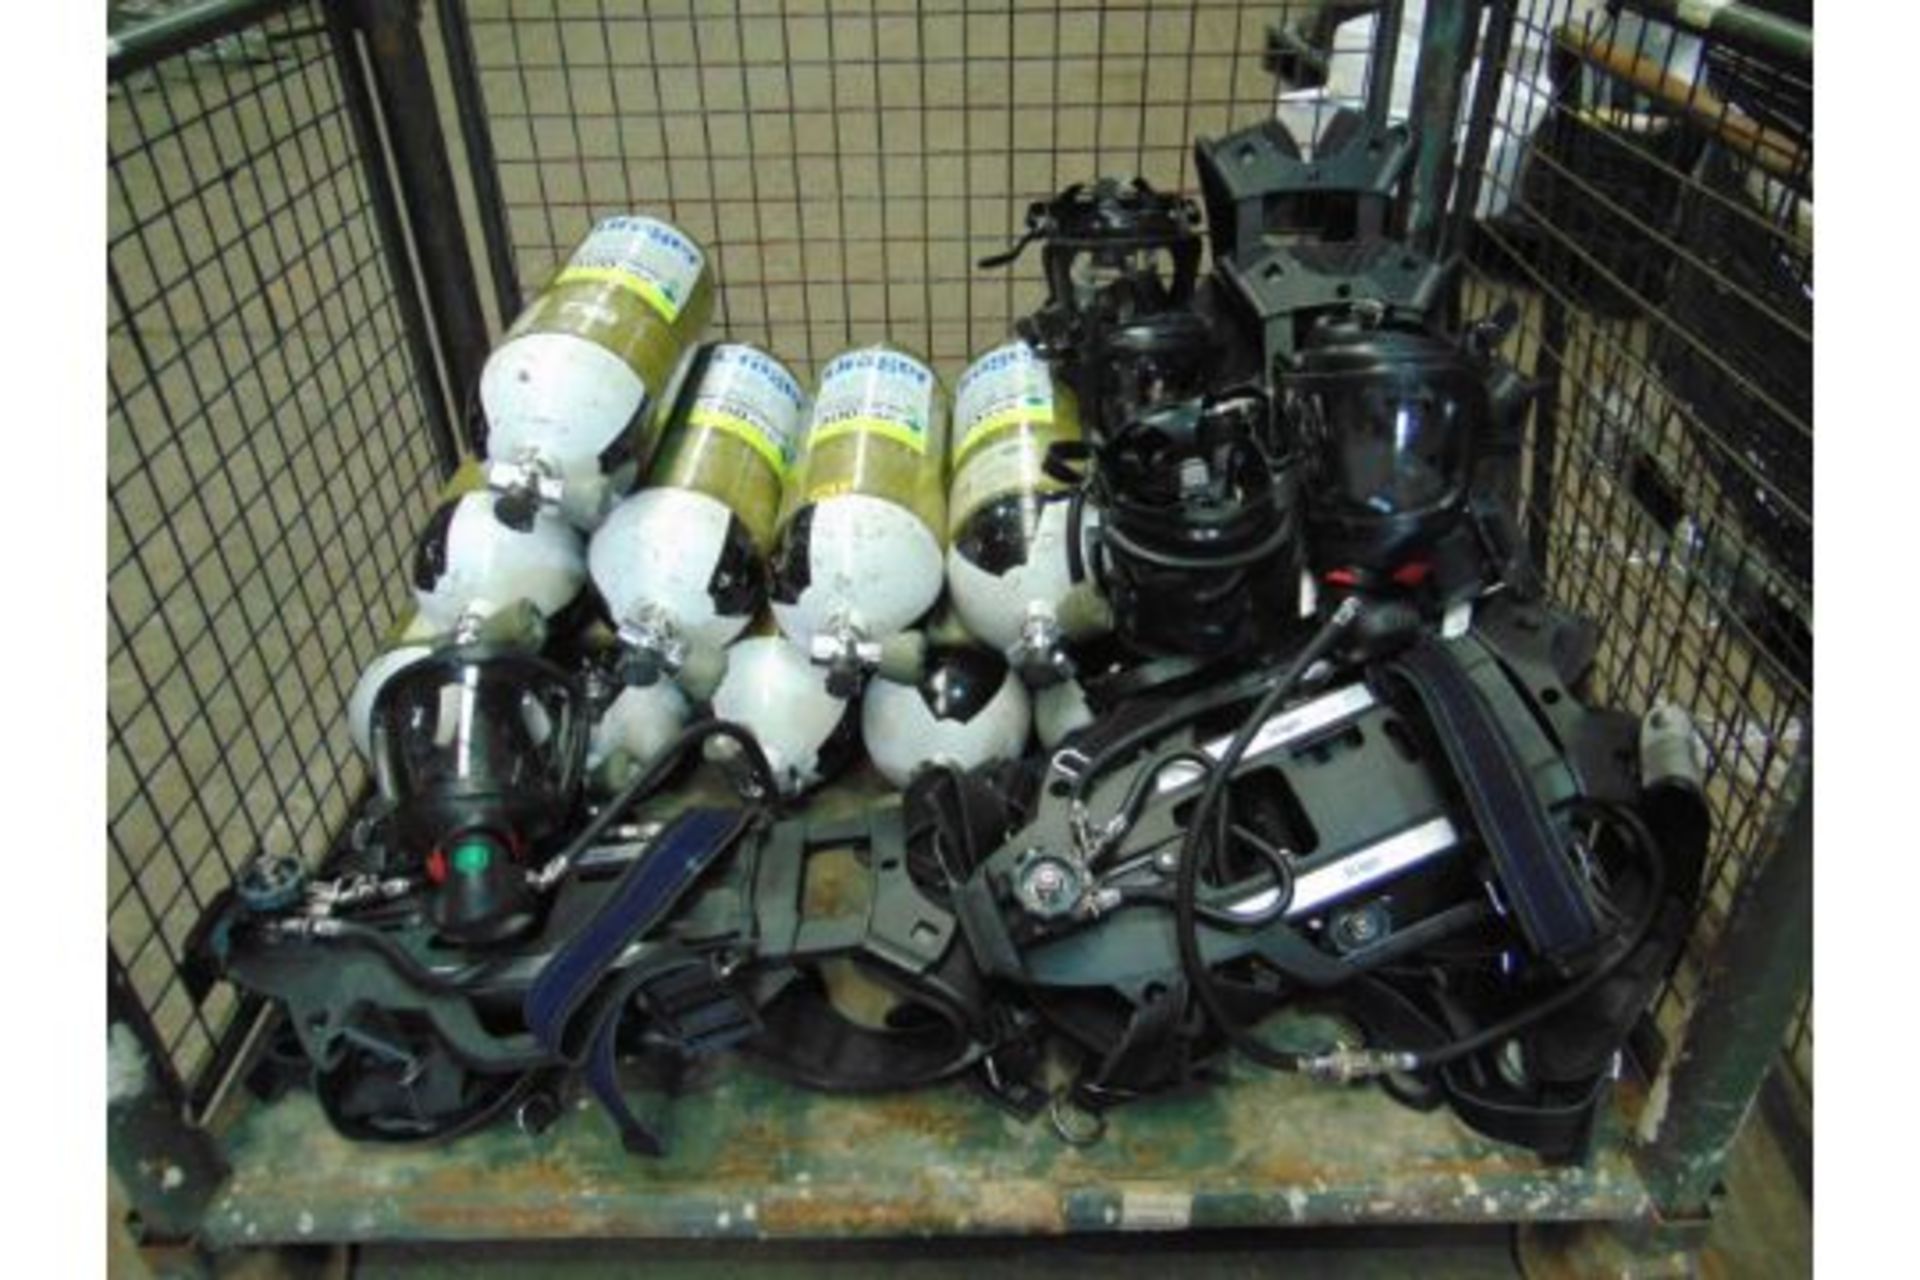 5 x Drager PSS 7000 Self Contained Breathing Apparatus w/ 10 x Drager 300 Bar Air Cylinders - Image 18 of 28